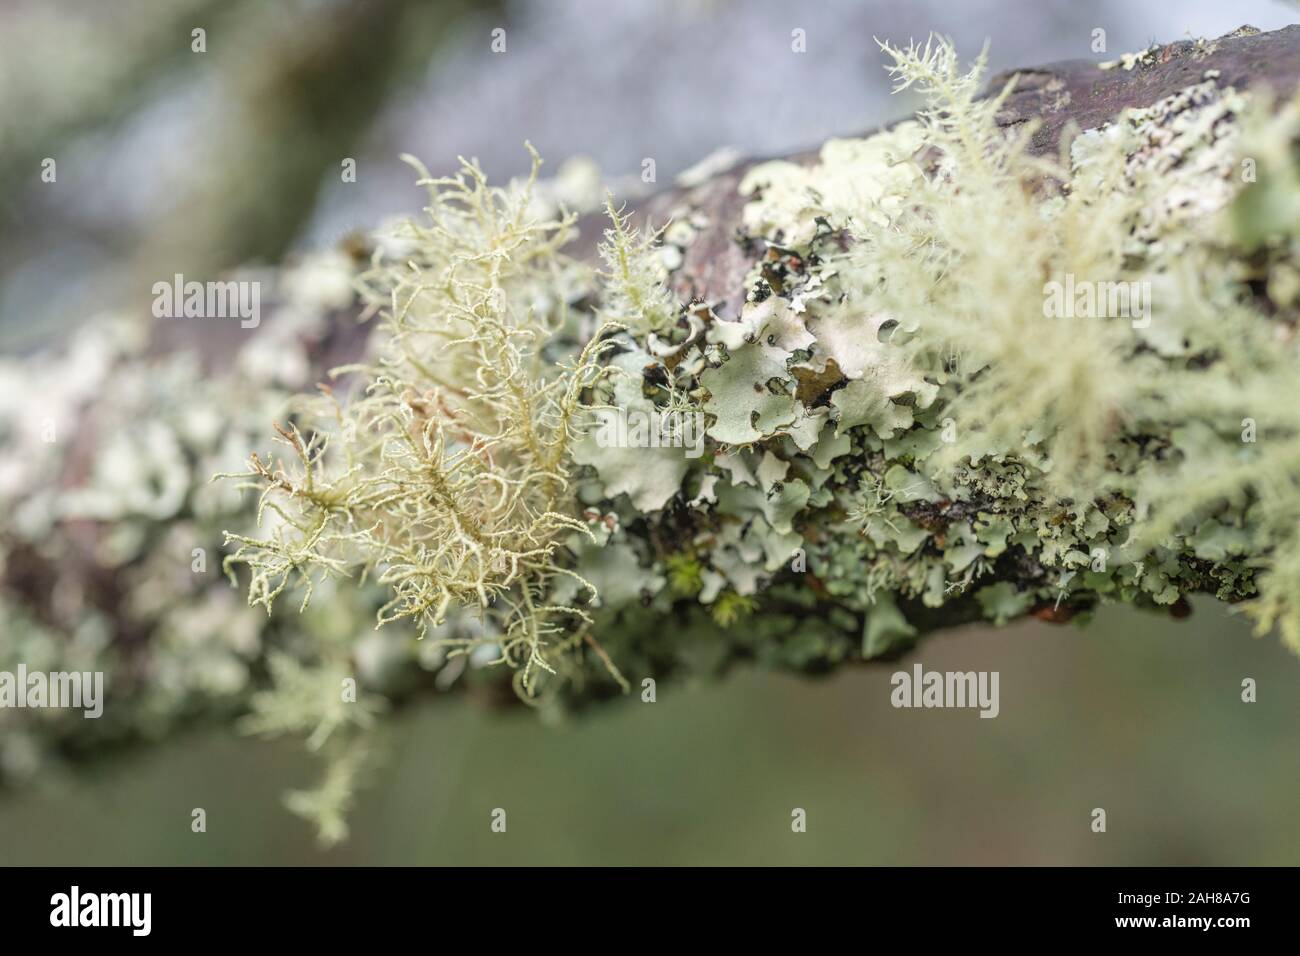 Close-up of pale green-yellow, whispy, tree lichen thallus on a twig - perhaps Usnea or Parmotrema. Sign of a clean atmosphere apparently. SEE NOTES. Stock Photo